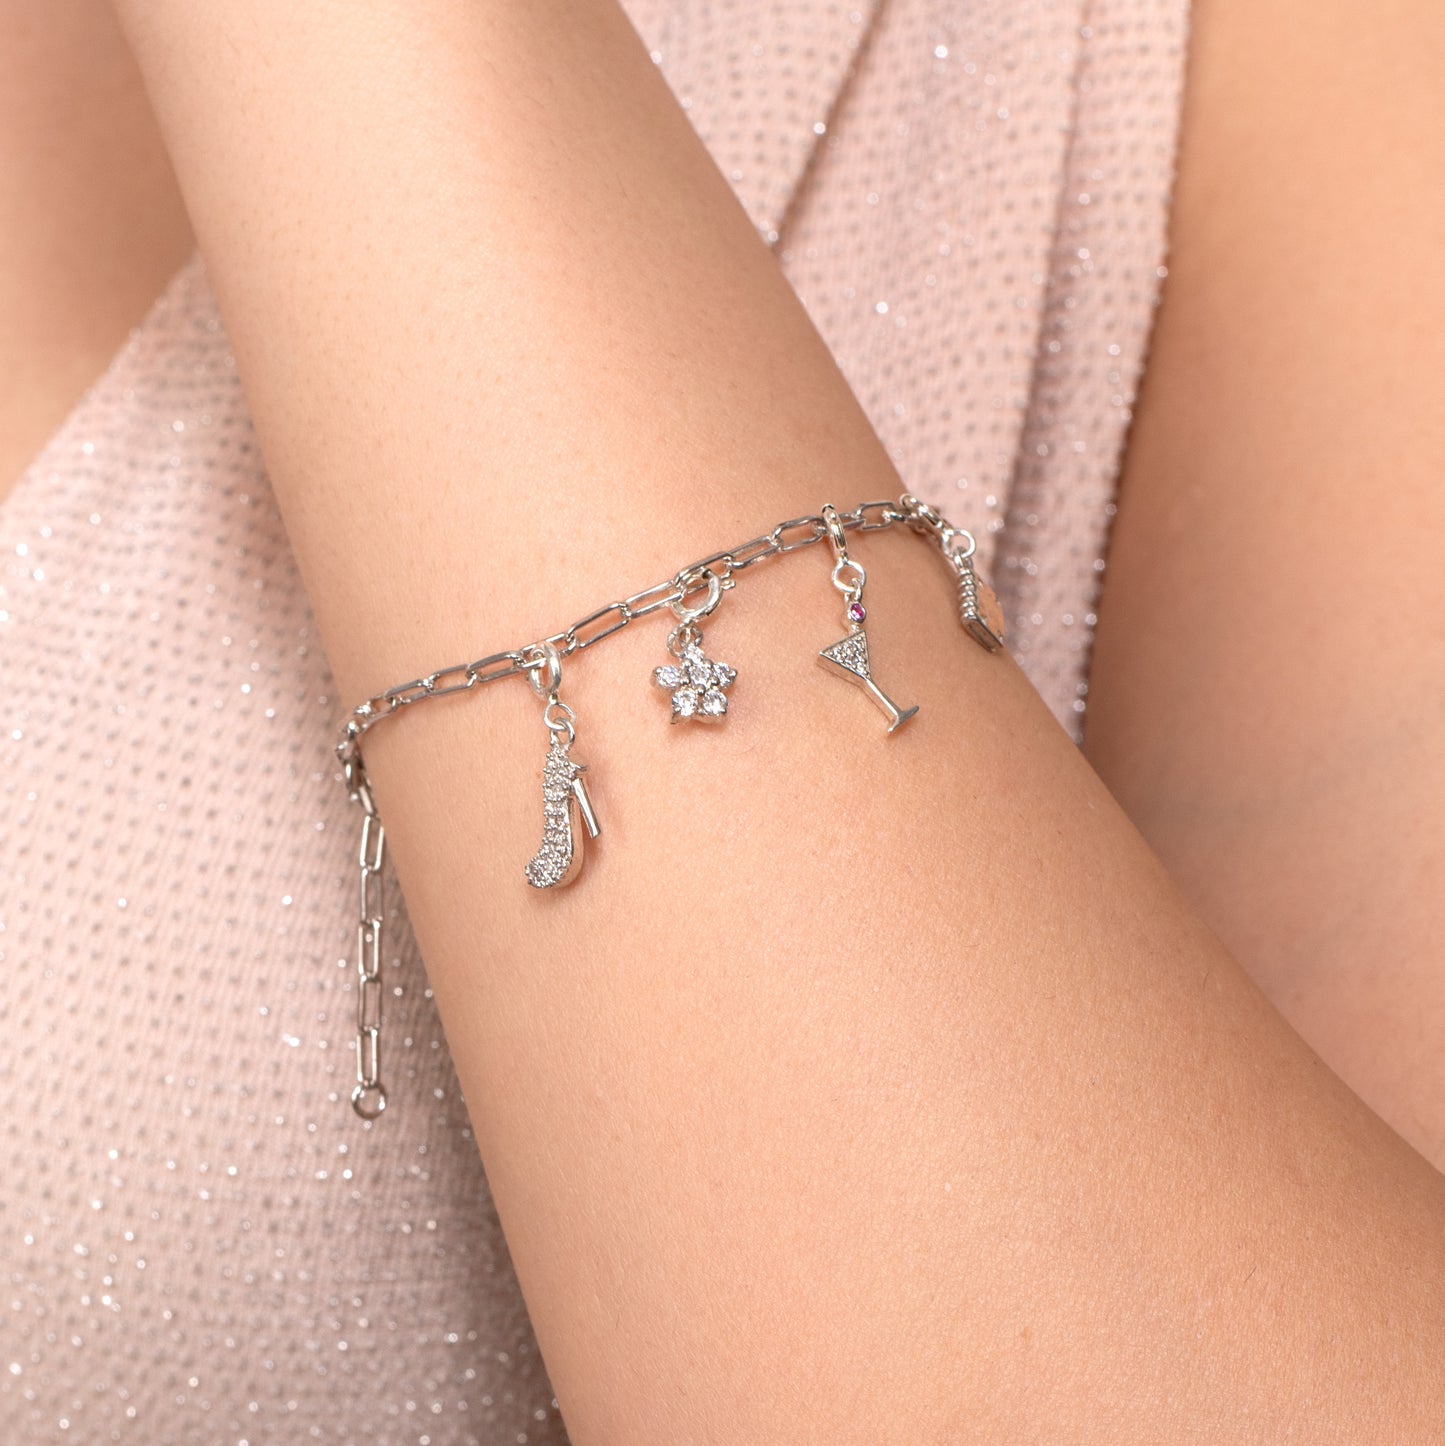 Personalized Charms Bracelet - 925 Silver (Pre-orders only)